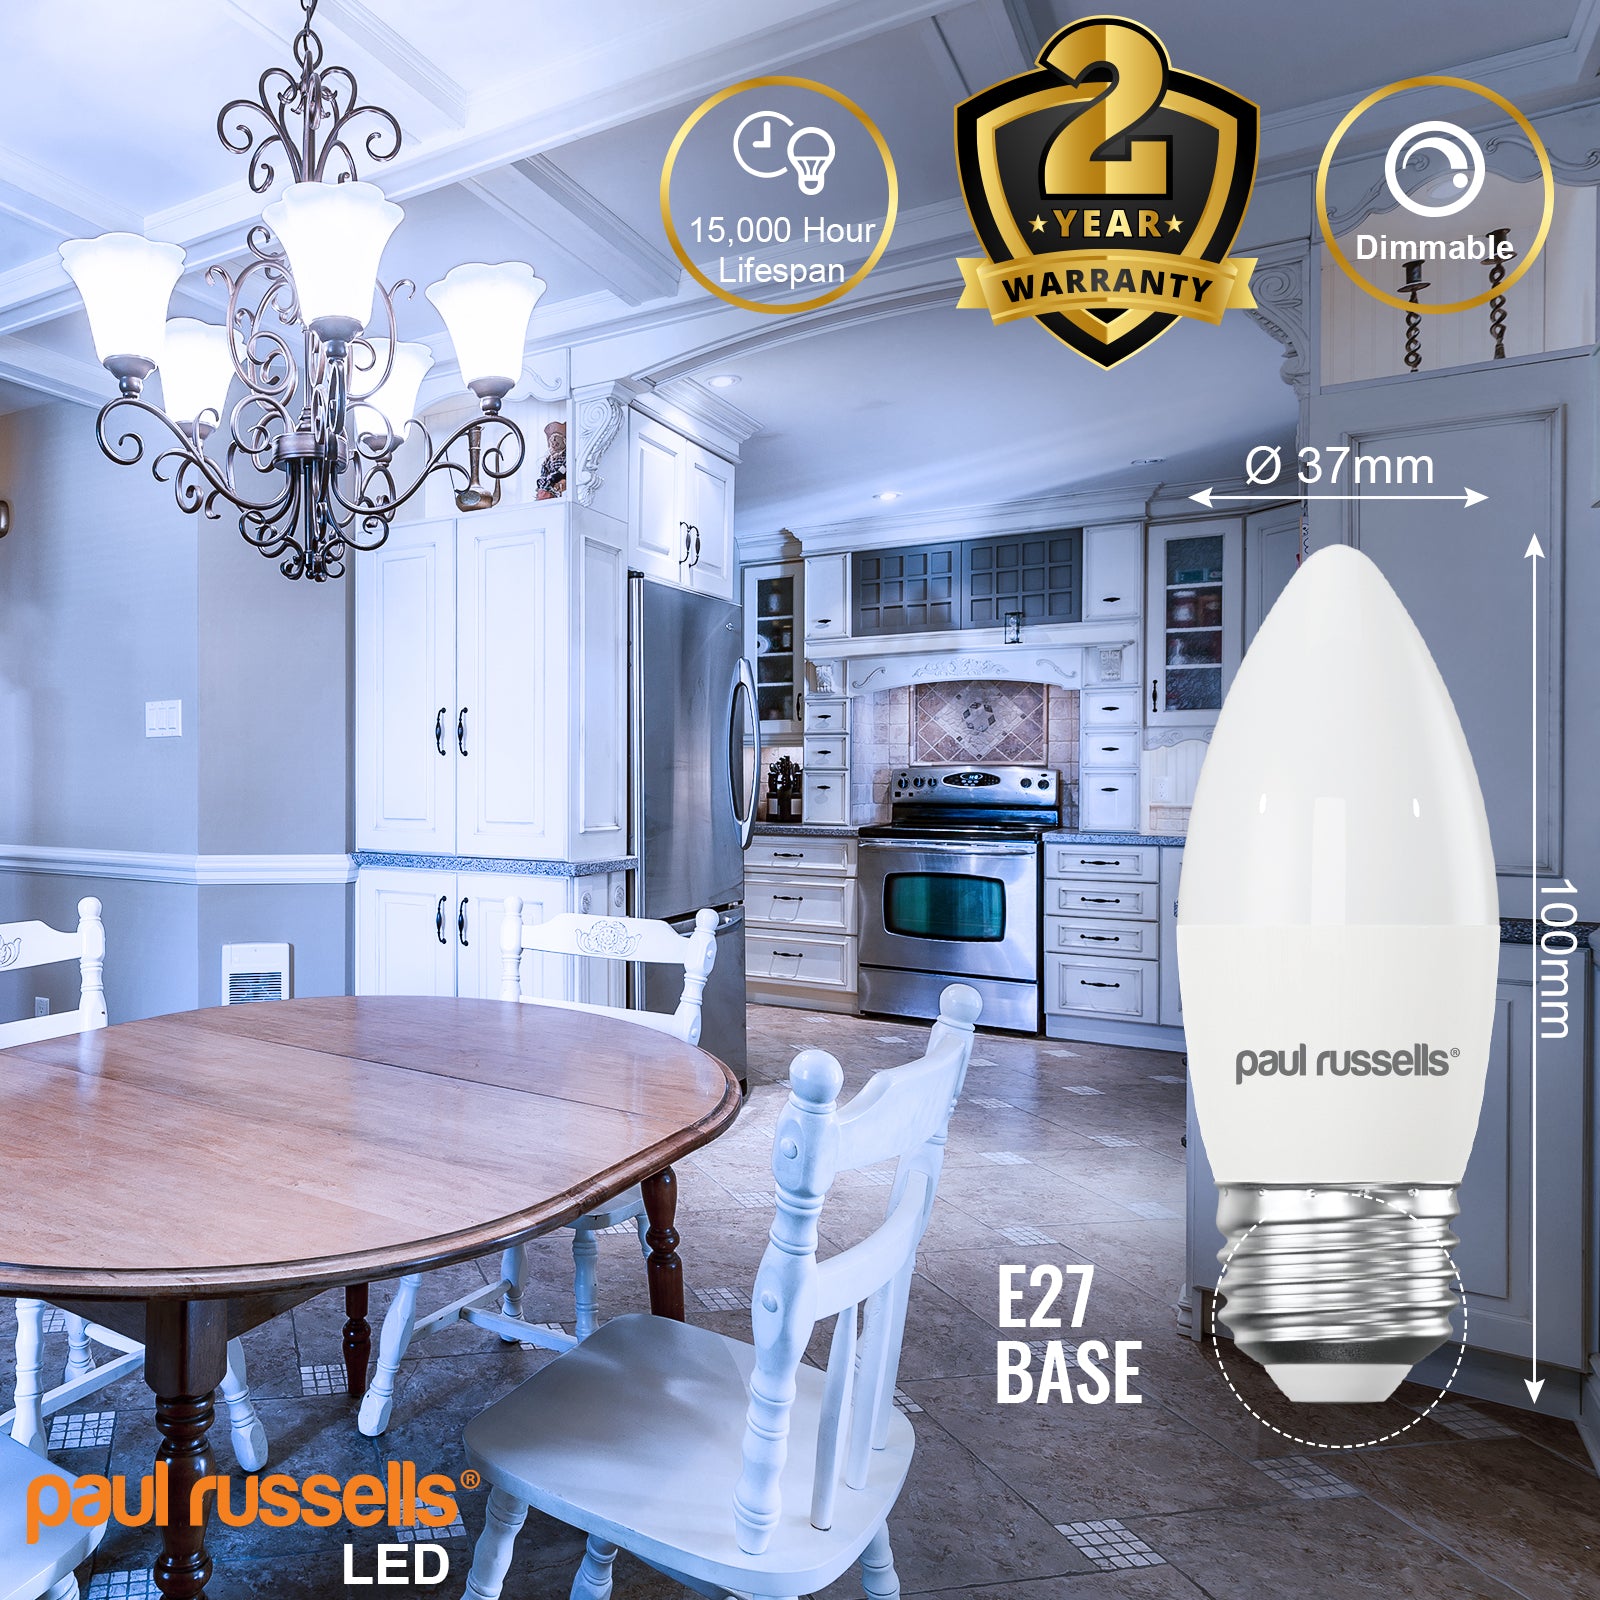 LED Dimmable Candle 5.5W=40W Day Light Edison Screw ES E27 Bulbs